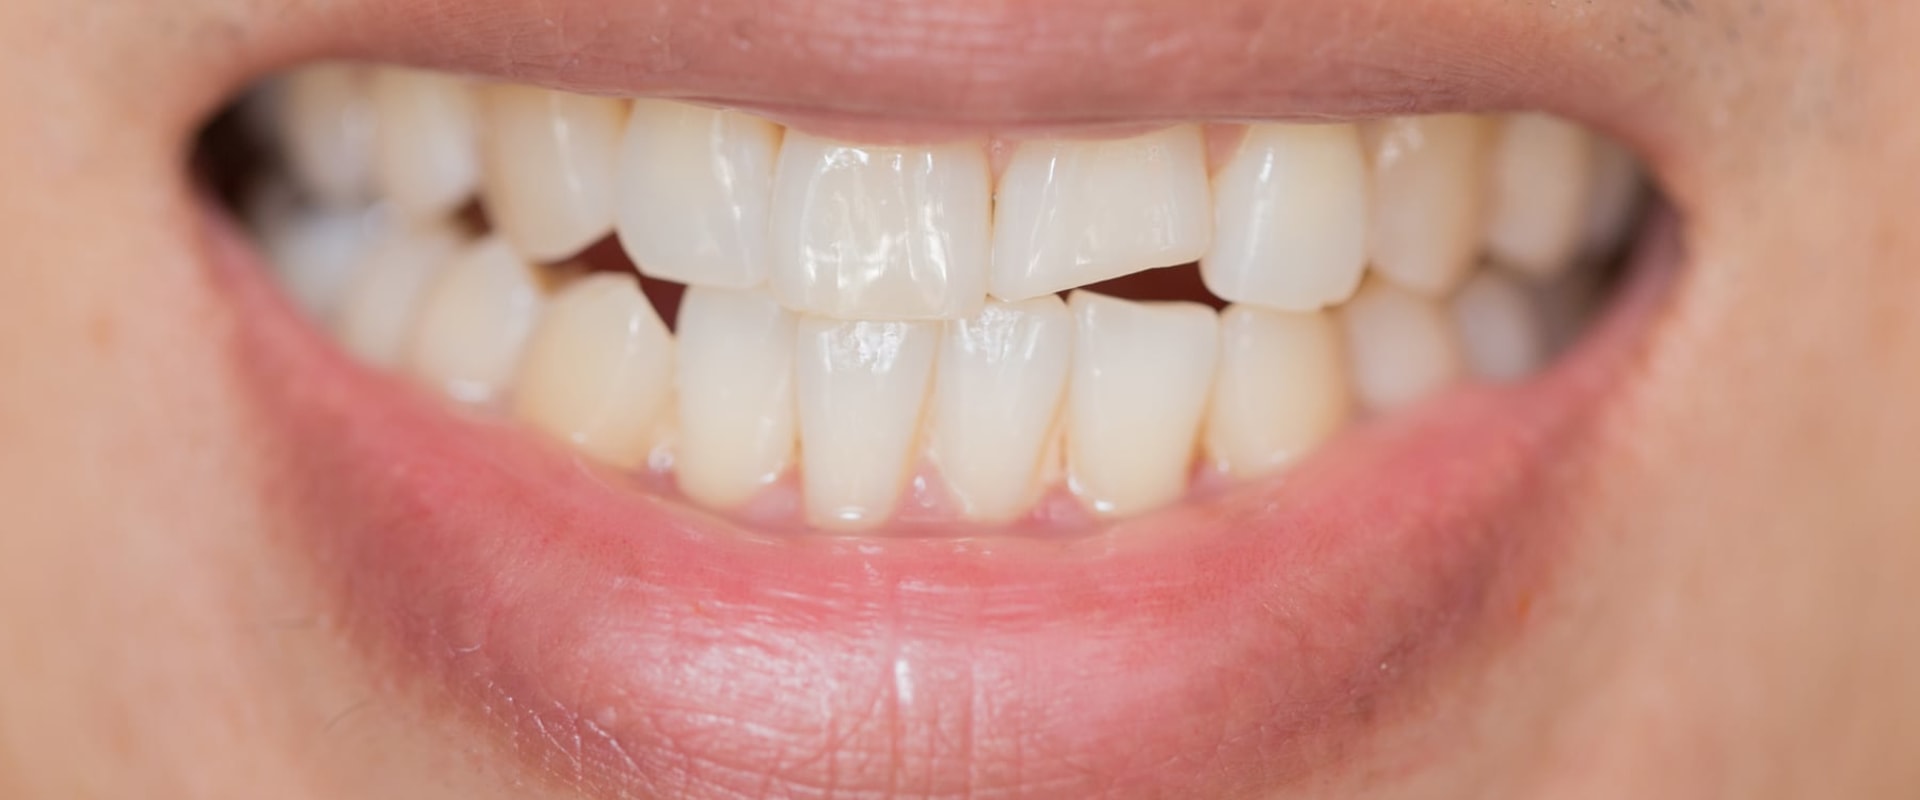 Does a Chipped Tooth Need Immediate Attention?